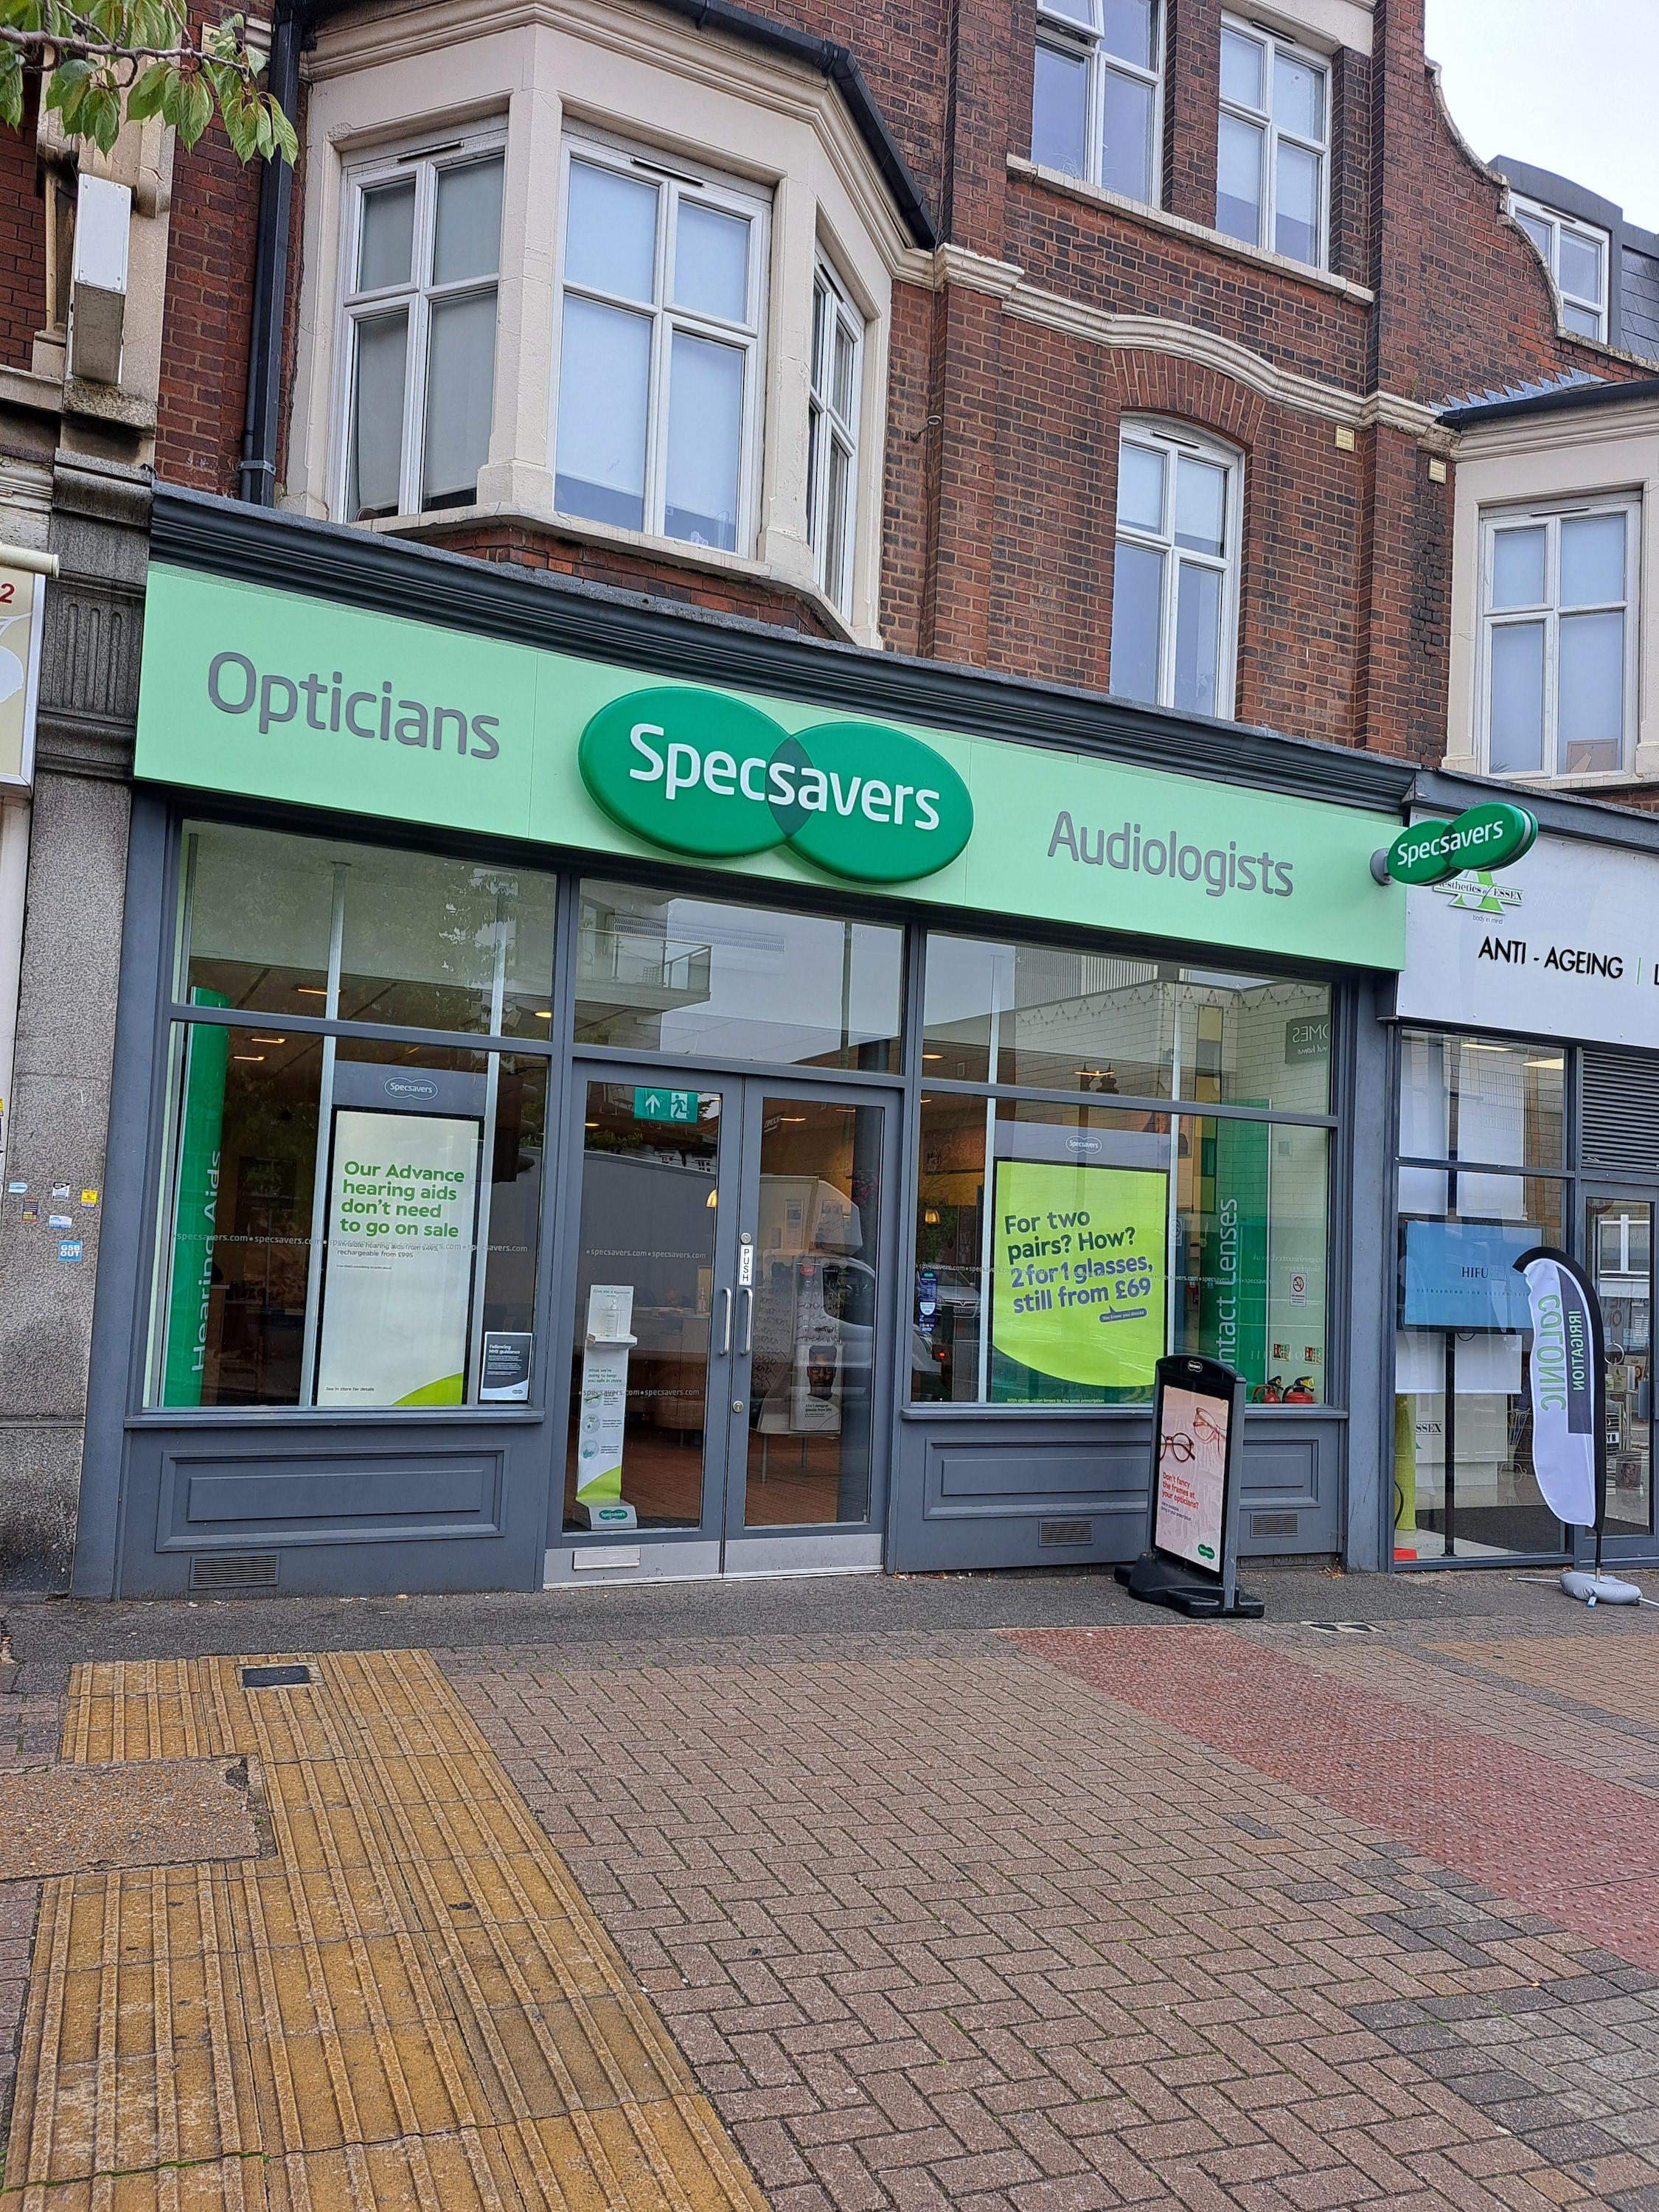 Images Specsavers Opticians and Audiologists - Upminster